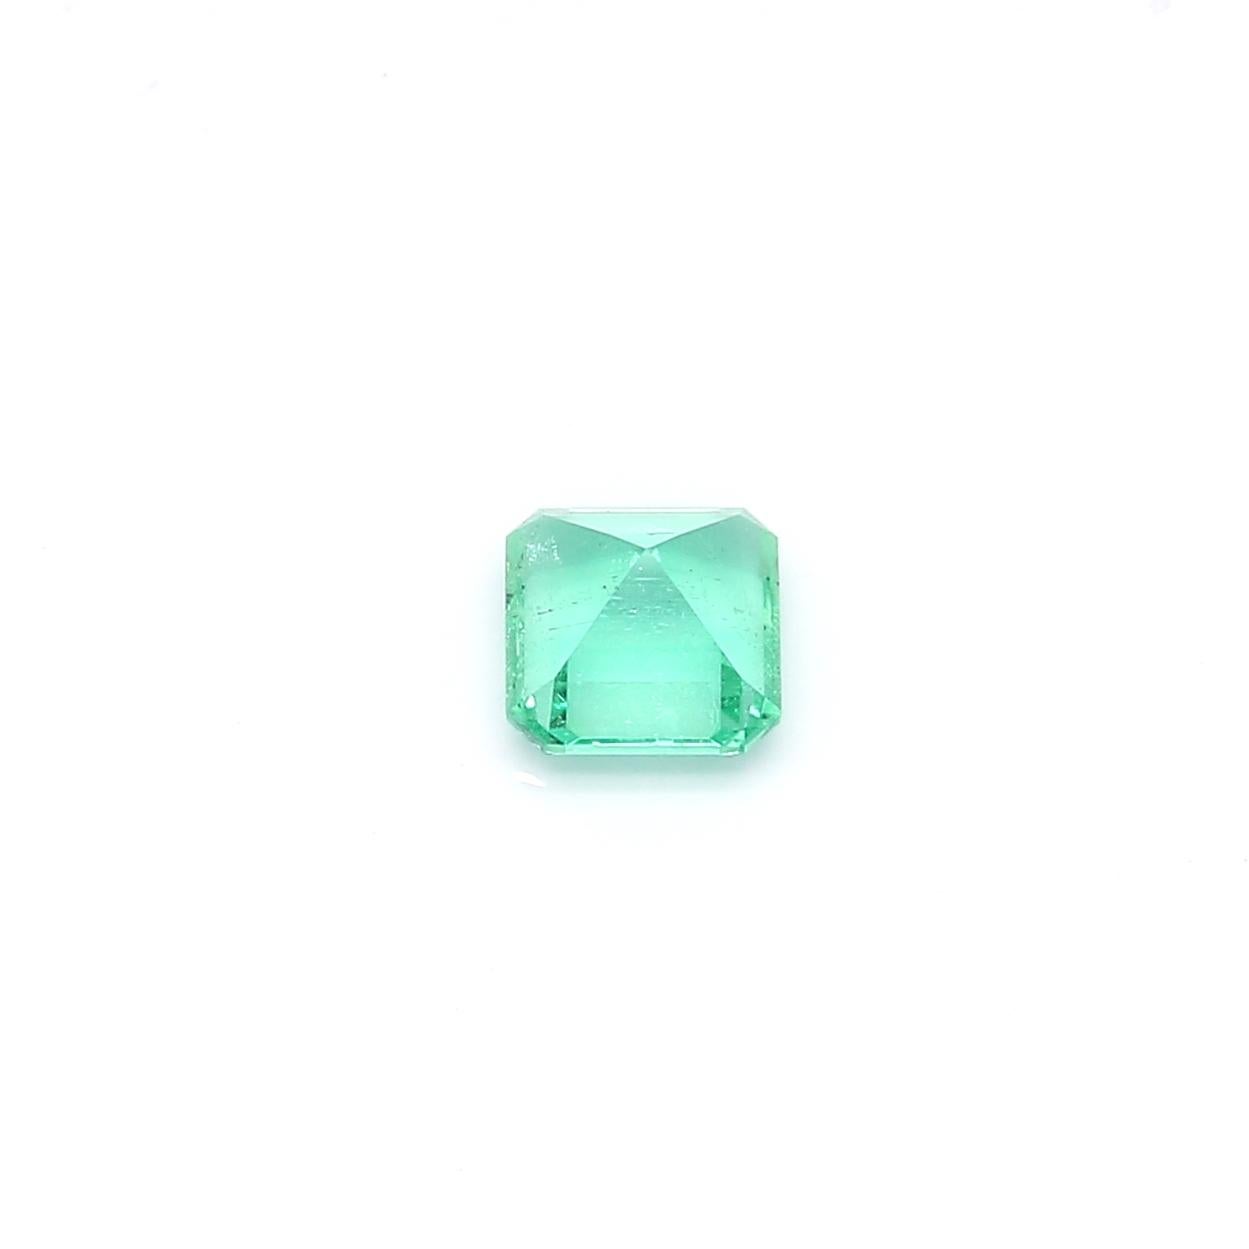 An amazing octagon-shaped Russian Emerald which allows jewelers to create a unique piece of wearable art.
This exceptional quality gemstone would make a custom-made jewelry design. Perfect for a Ring or Pendant.

Shape - Octagonal
Weight - 0.57